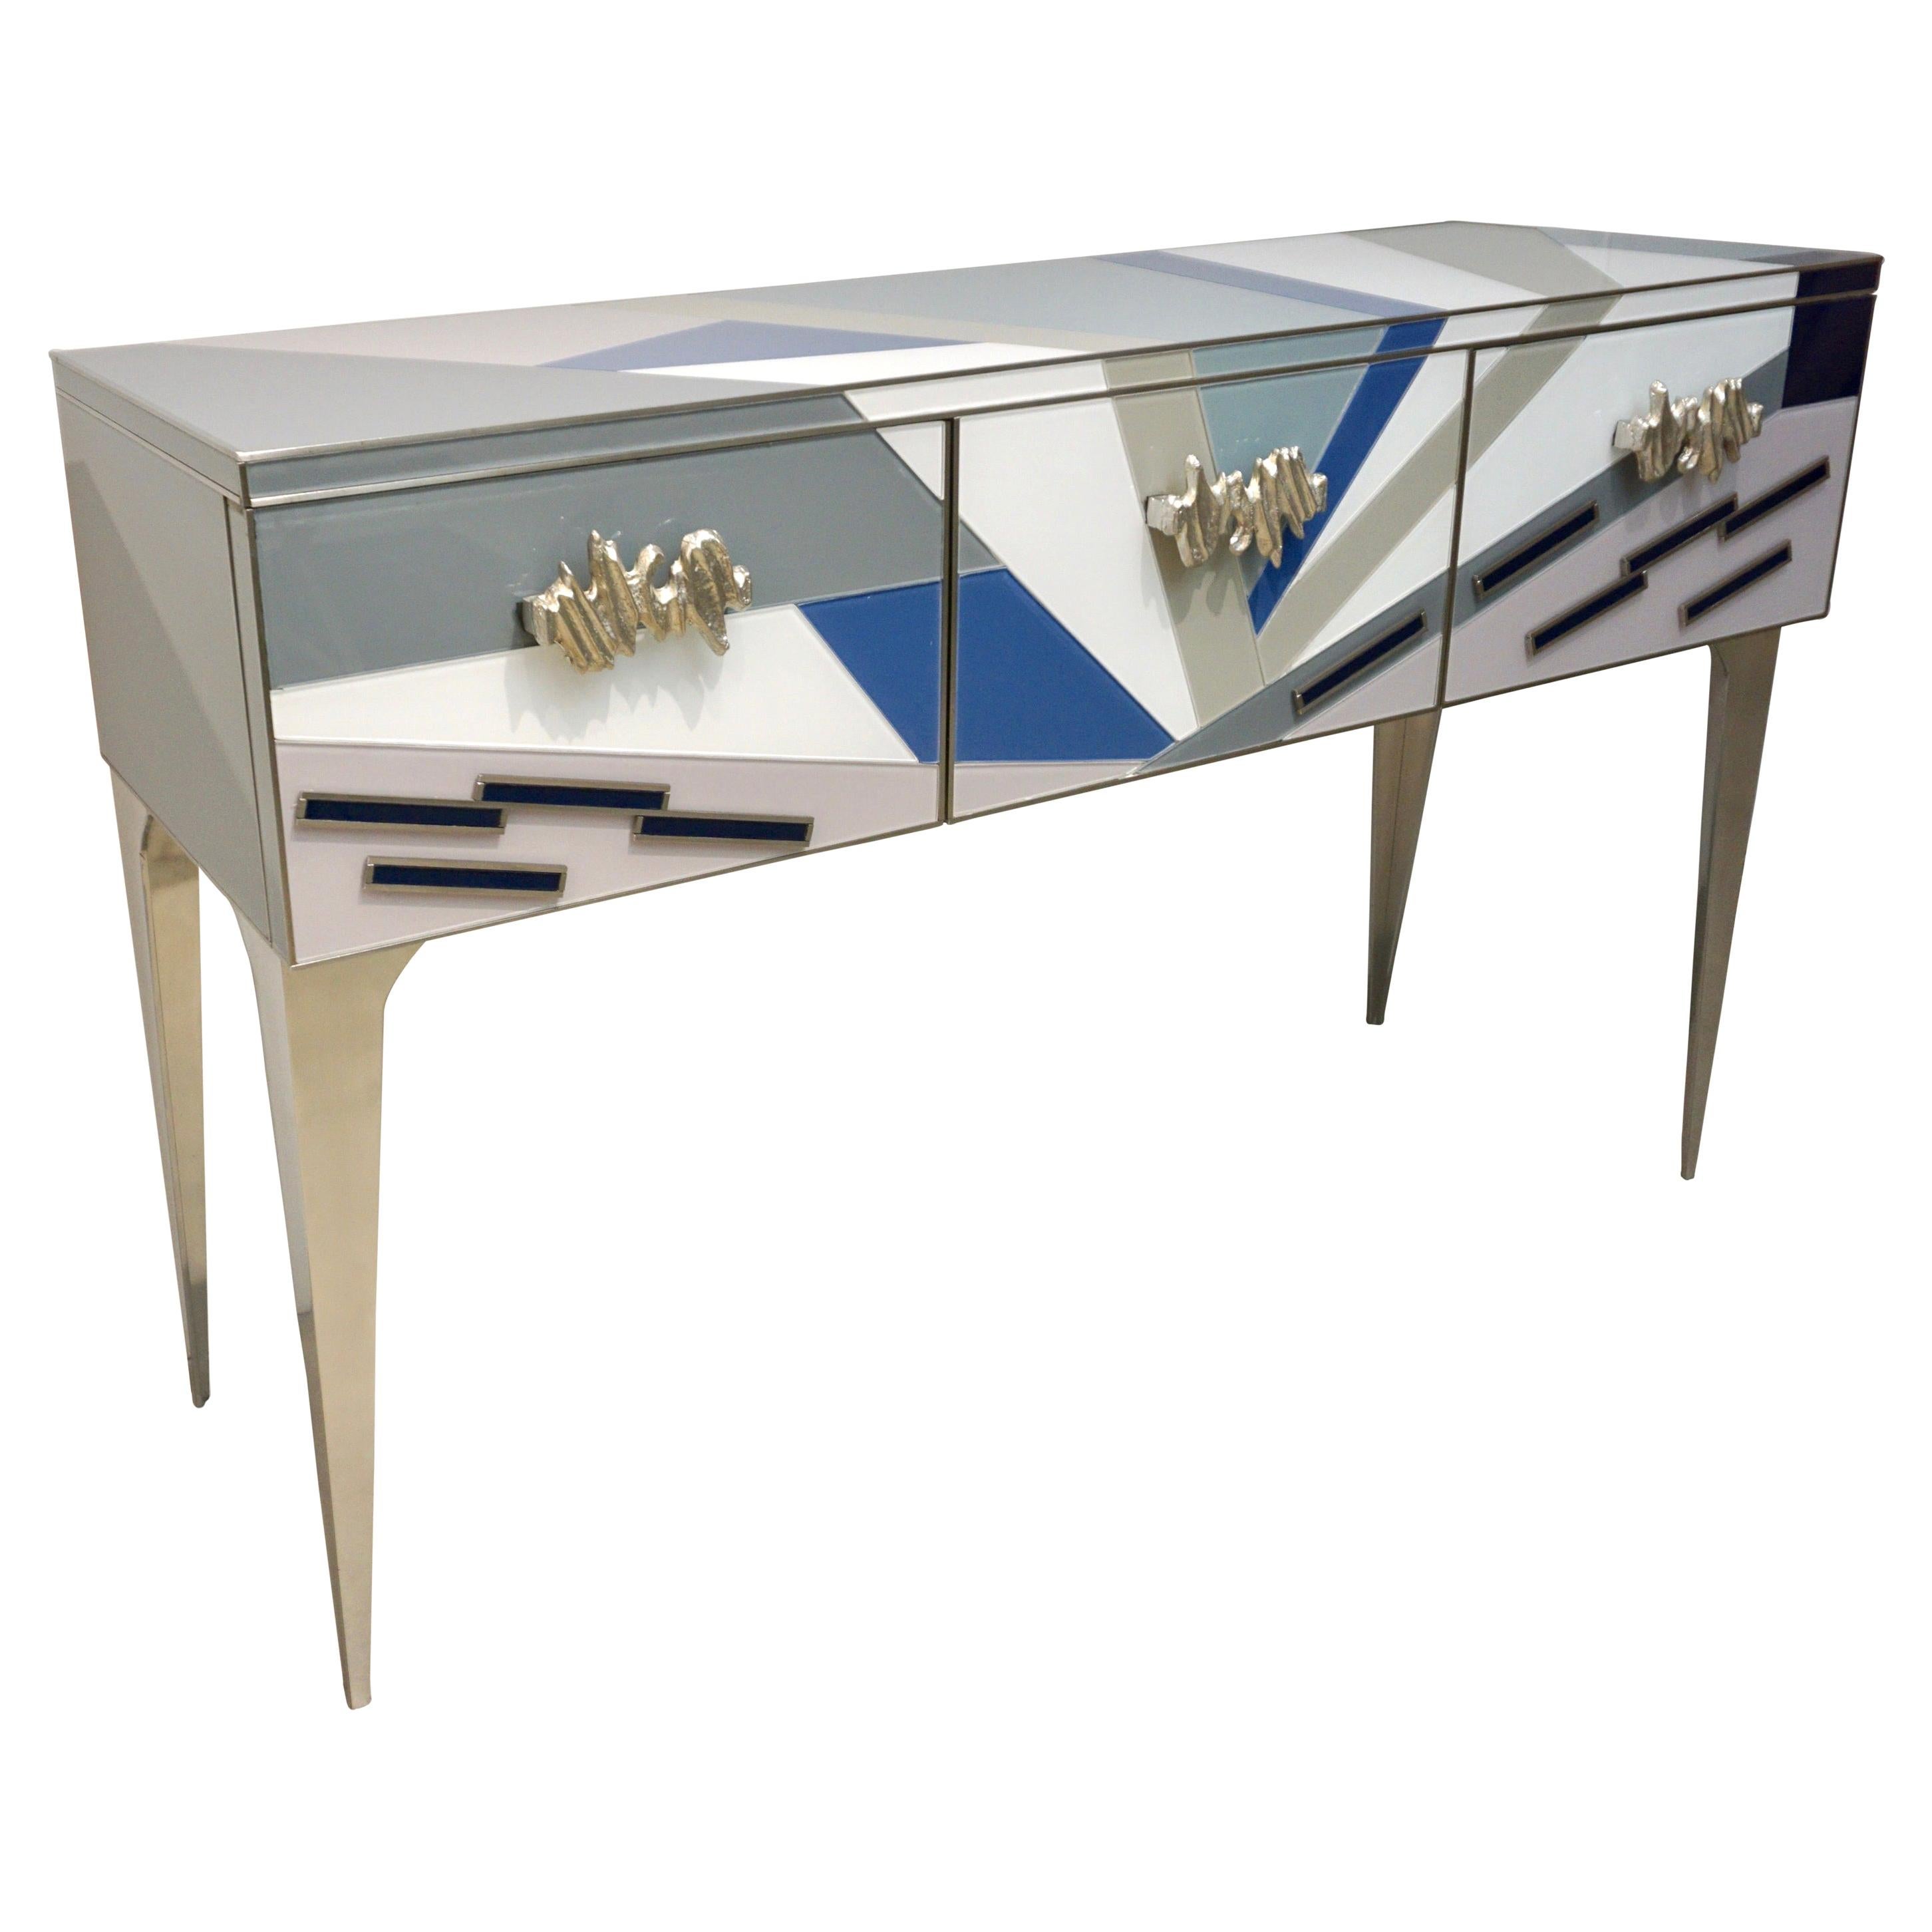 Contemporary Italian Pop Design Colored Glass Console / Sideboard on Nickel Legs